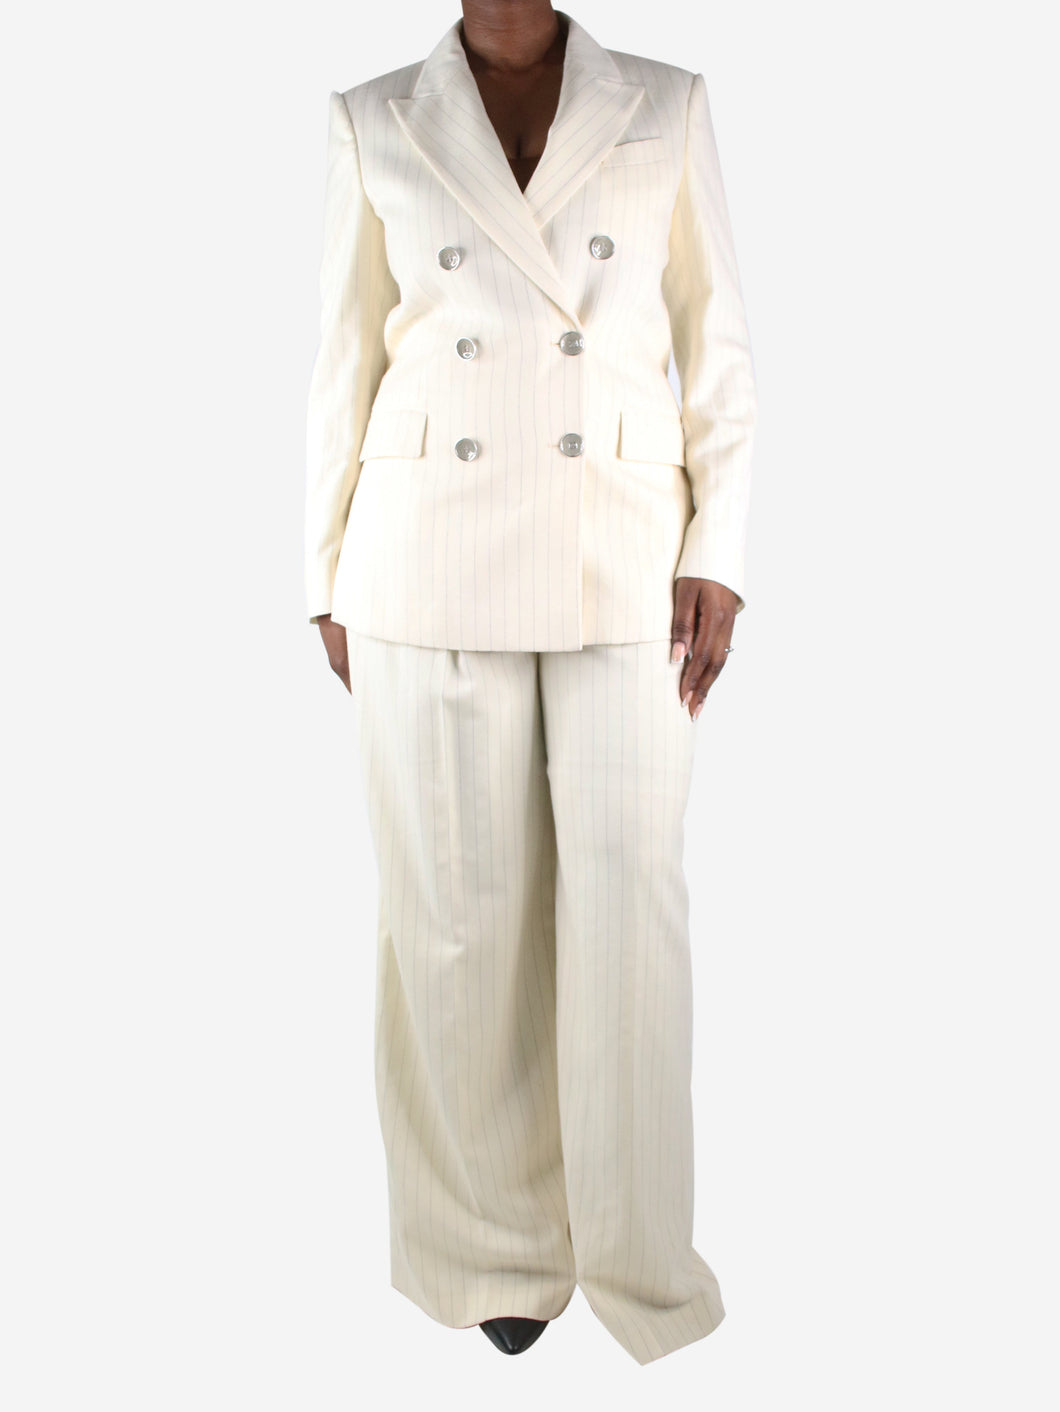 Cream double-breasted wool striped blazer and trouser set - size UK 14 Sets Racil 